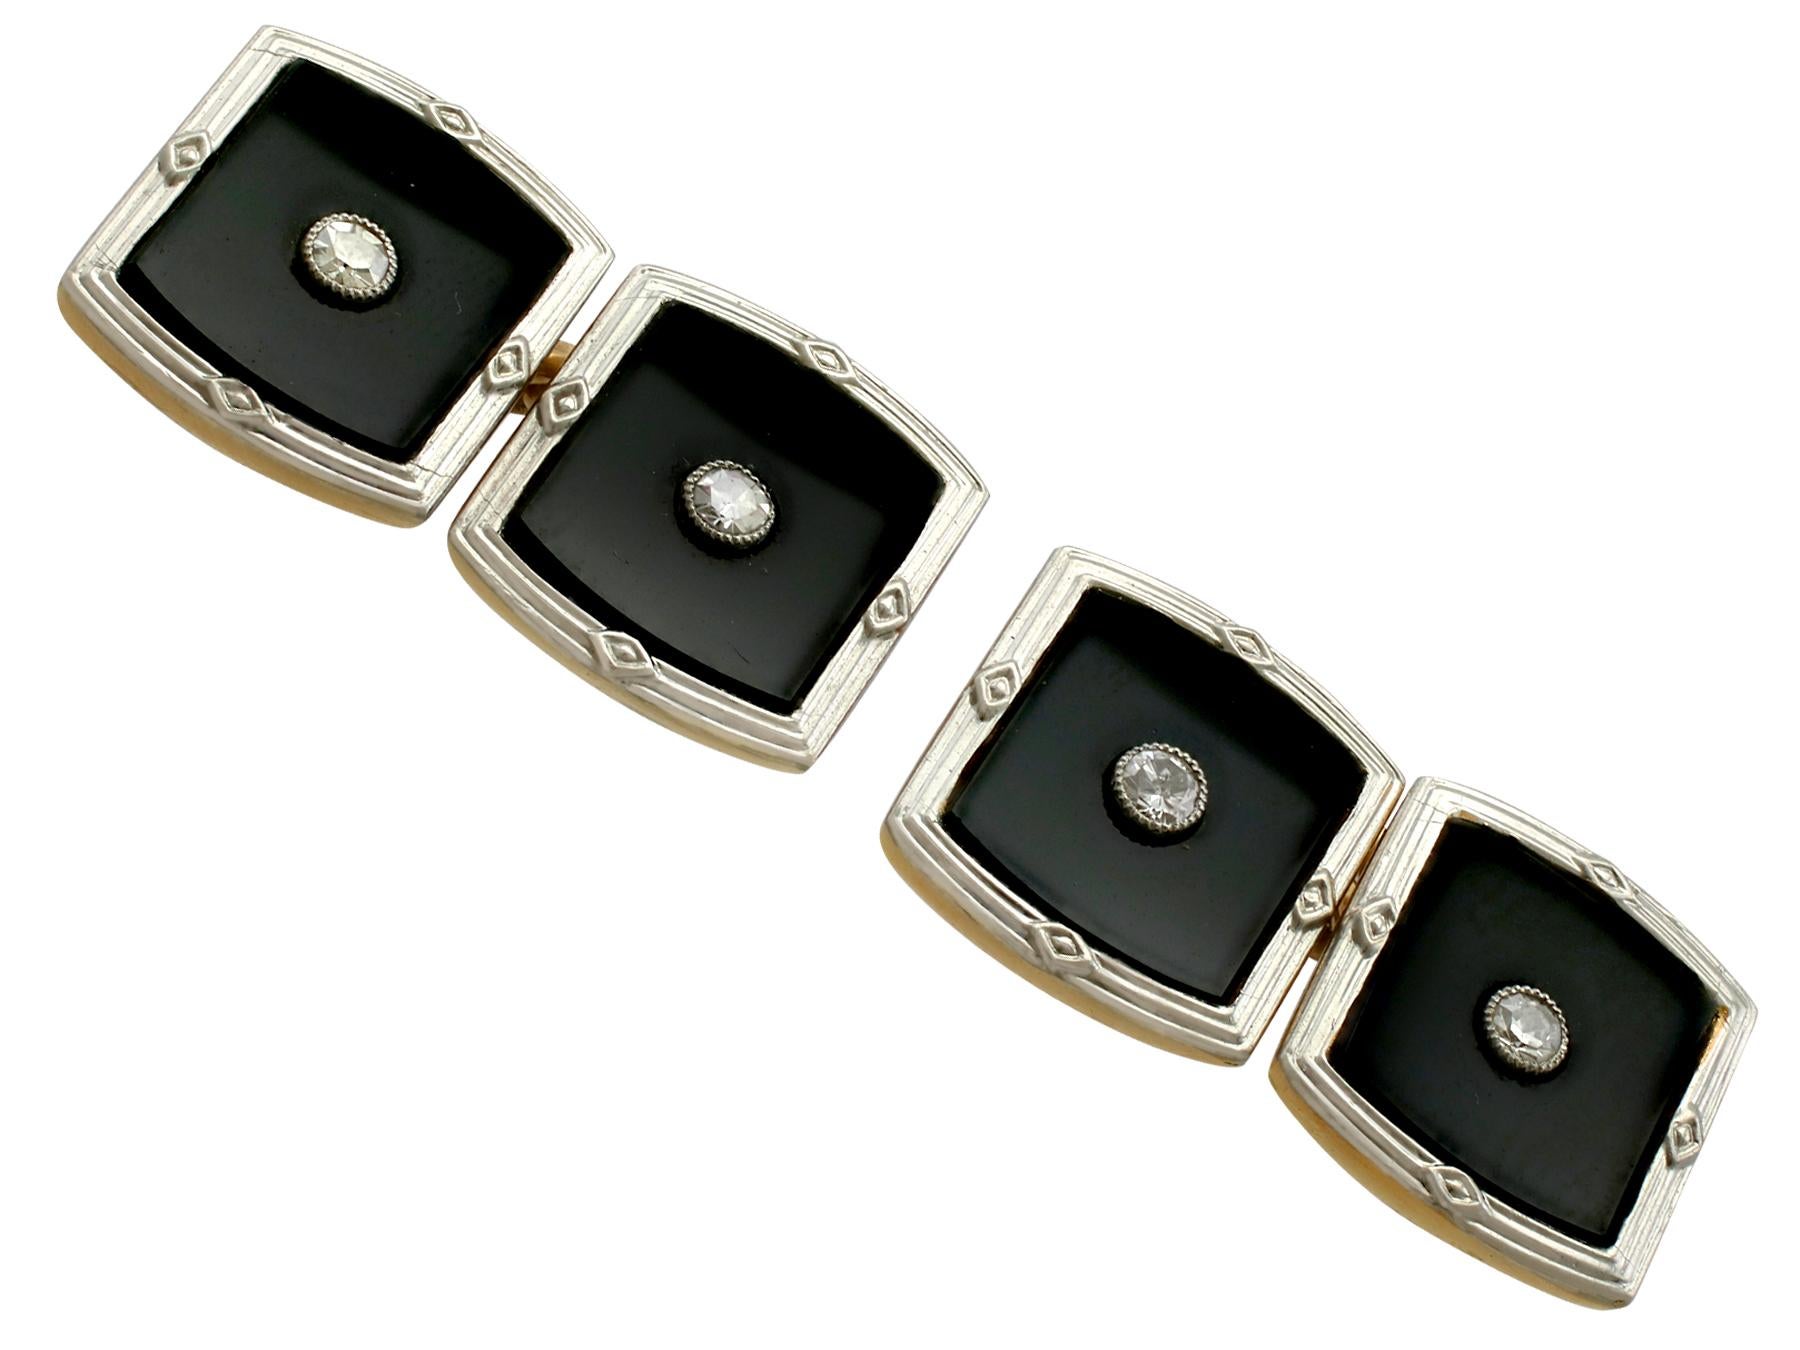 A fine and impressive pair of antique black onyx and 0.16 carat diamond, 18 karat yellow gold, platinum set cufflinks; part of our antique jewelry and estate jewelry collections.

These fine and impressive antique onyx cufflinks have been crafted in